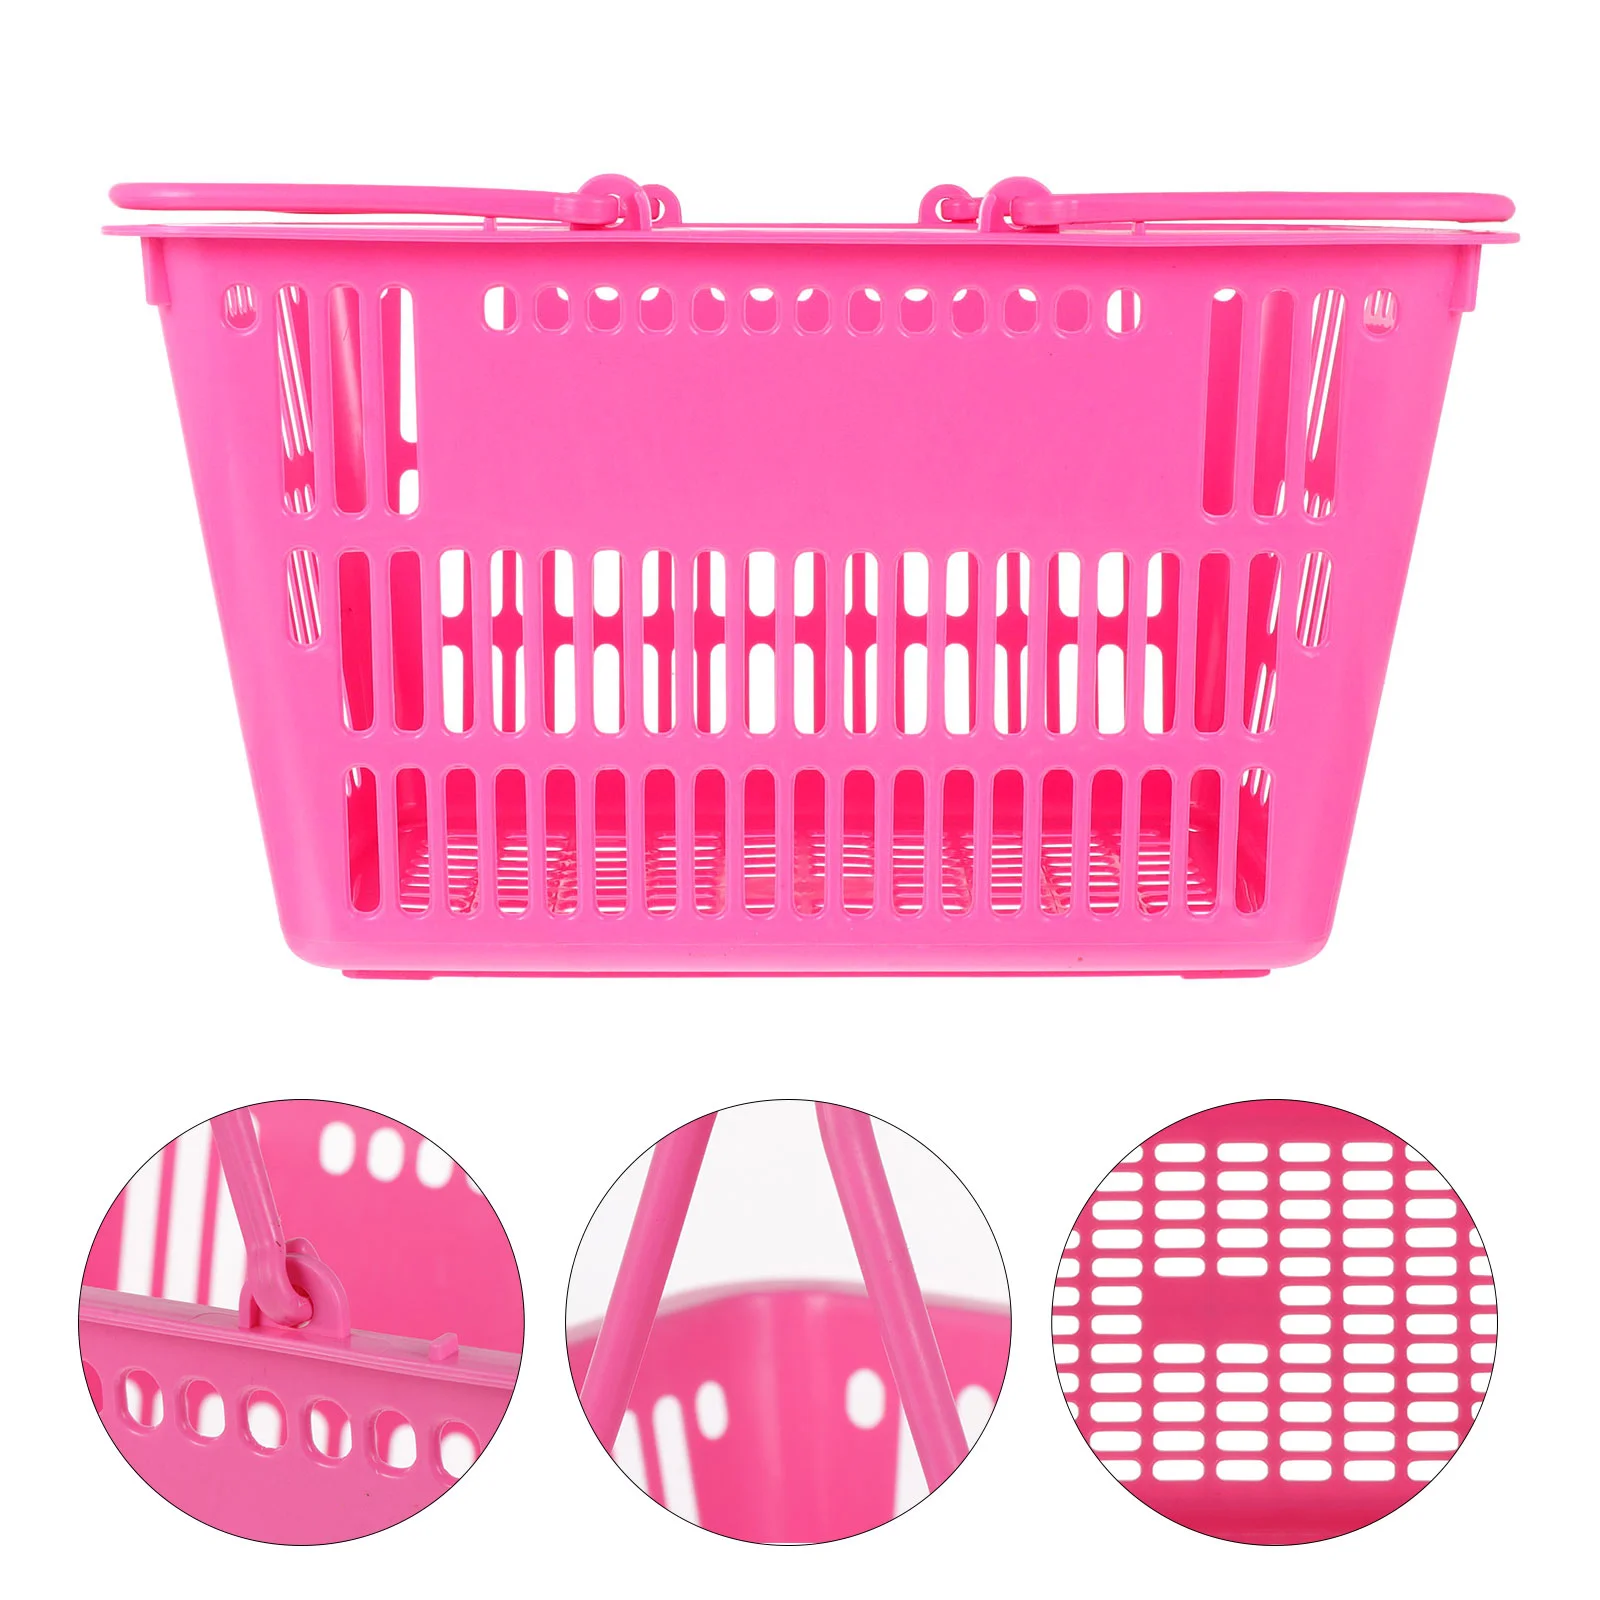 

Grocery Baskets With Handles Mini Plastic Containers Picnic Basket Mall Supply Shopping Basket Large Storage Bins